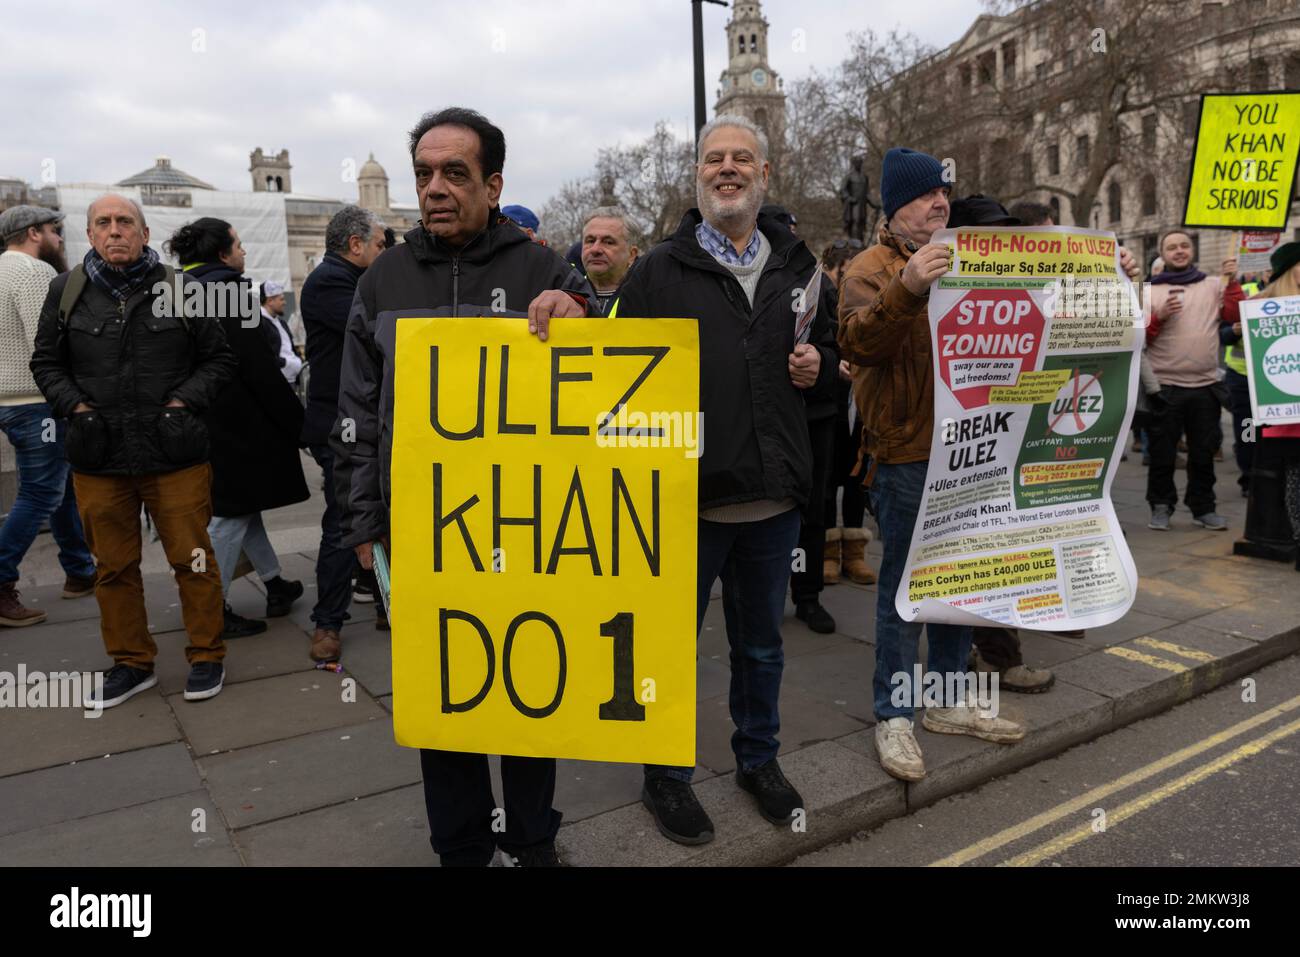 Anti-Ulez protesters in Trafalgar Square, London, protesting against implementation of the charge expected to affect 160,00 cars and 42,00 vans daily. Stock Photo